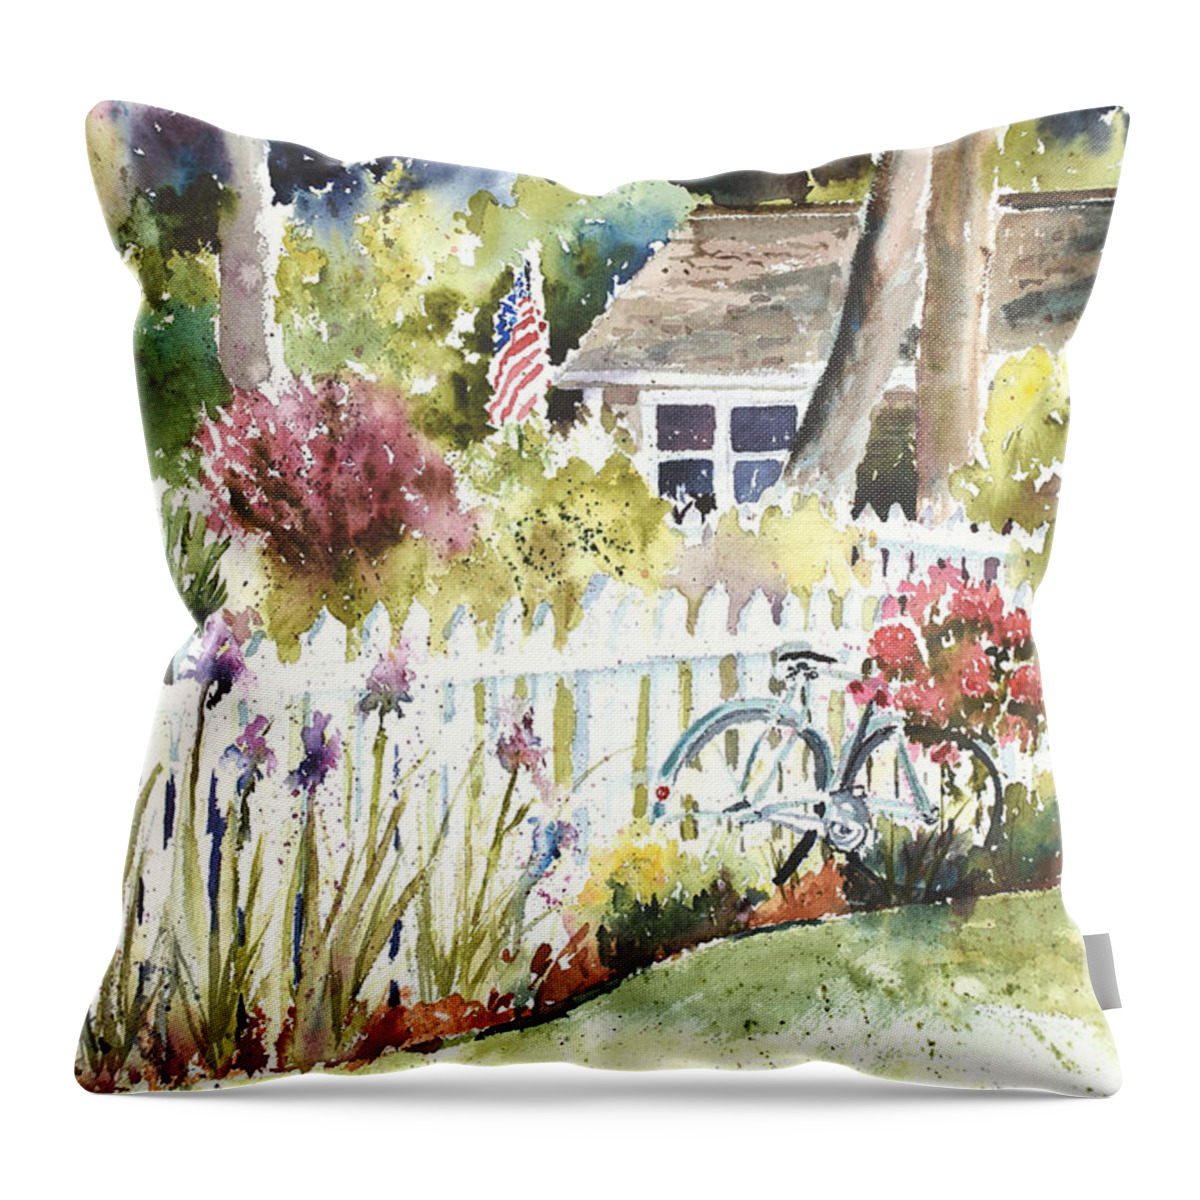 Vintage Bicycle Against Cottage And Picket Fence. Iris Throw Pillow featuring the painting Corey Bike by Sandra Strohschein